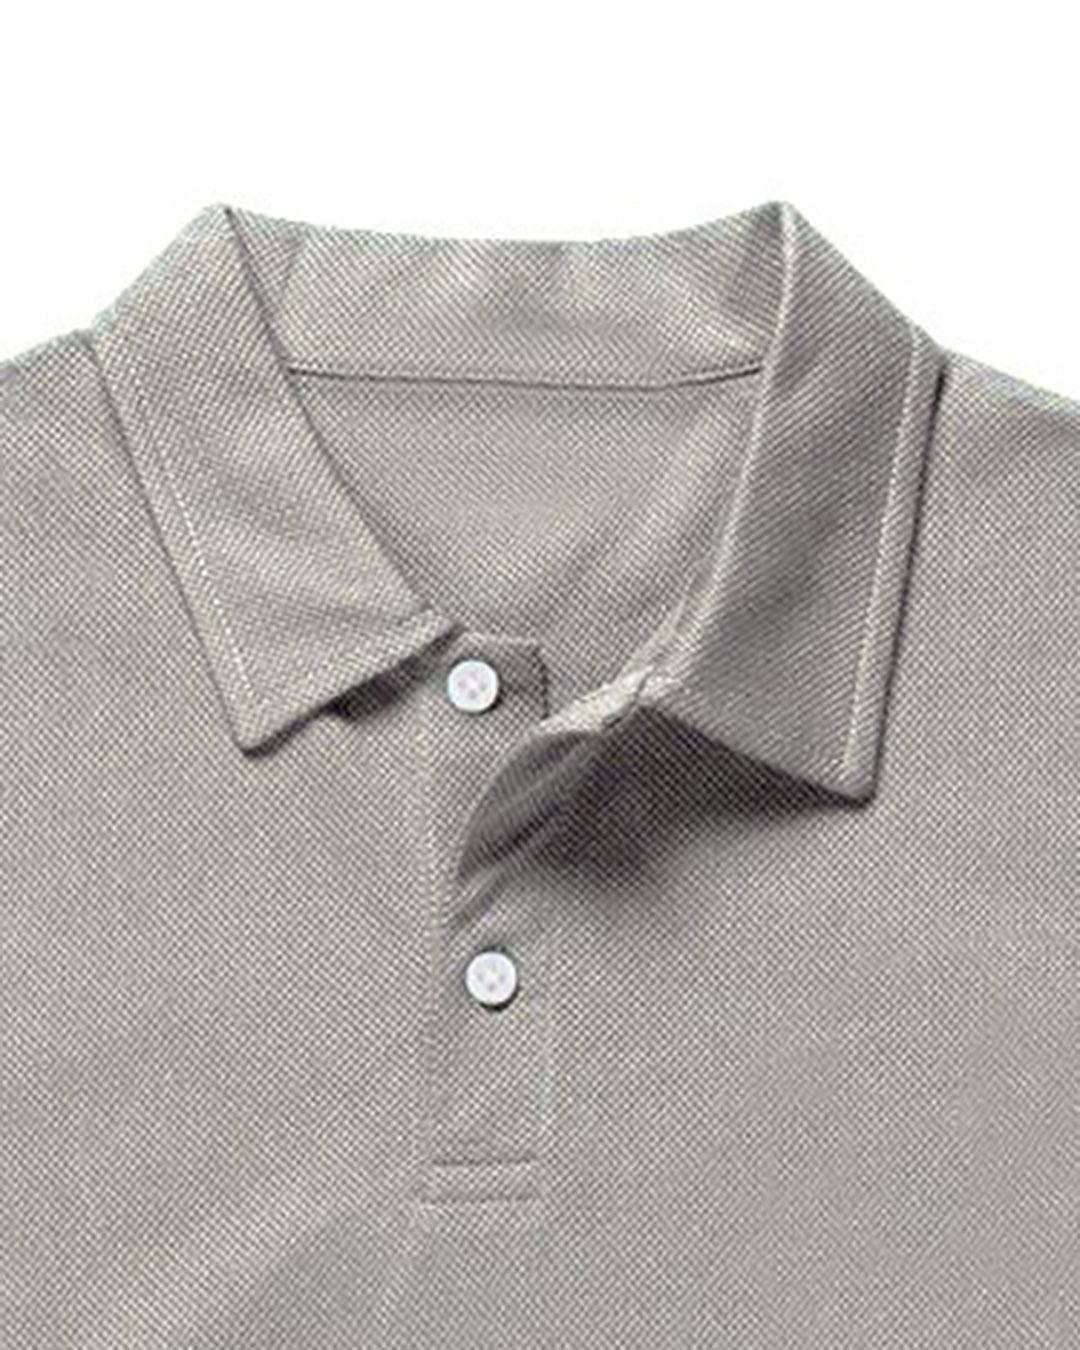 Collar of the custom oxford polo shirt for men by Luxire in grey